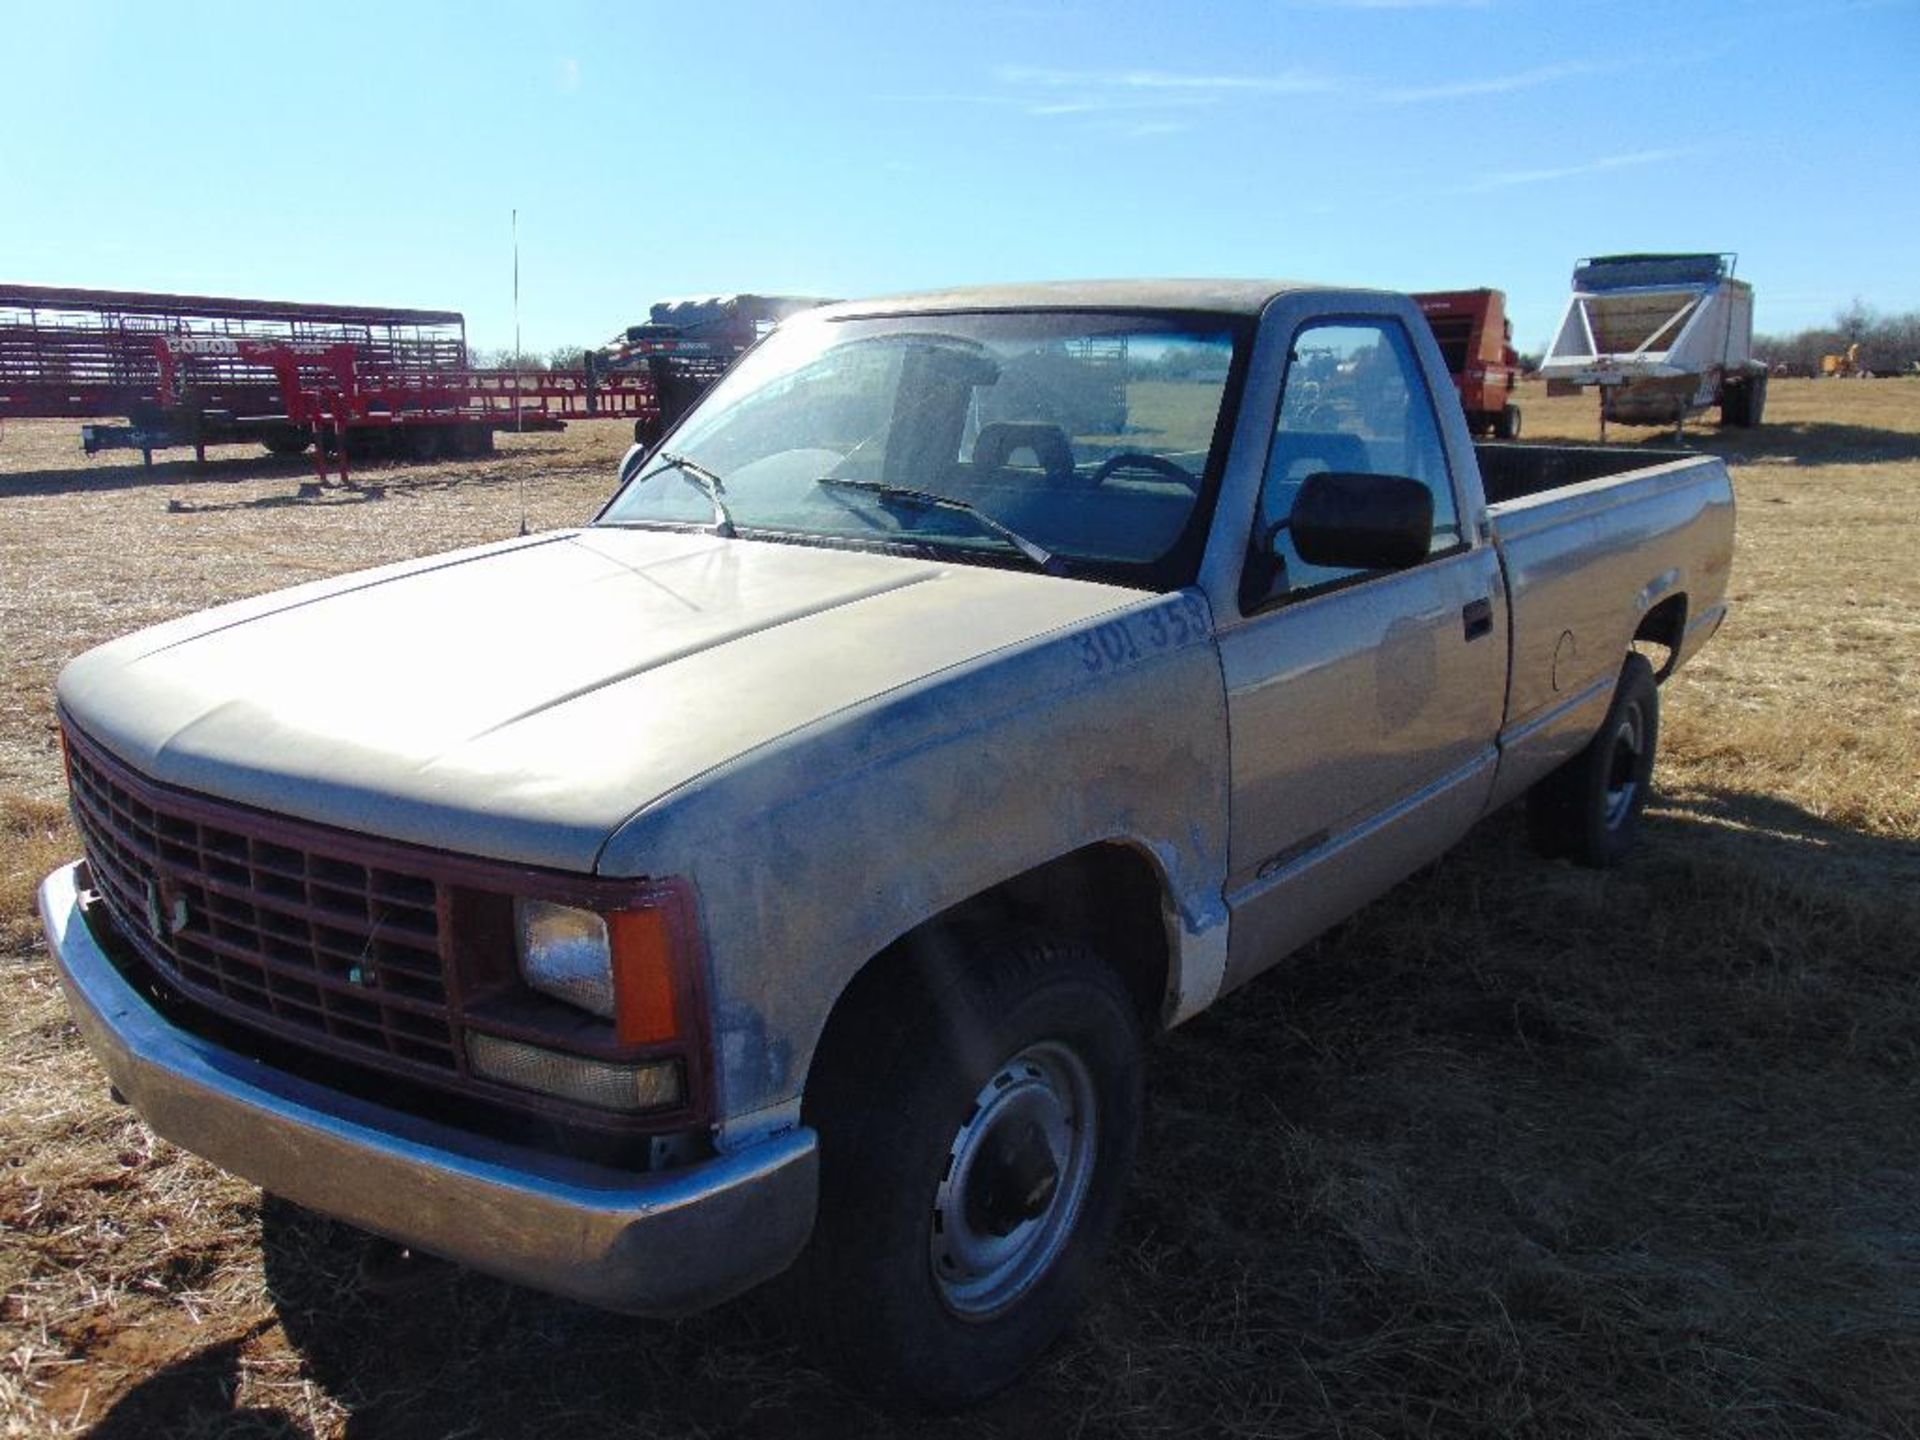 1992 Chevy 2500 Pickup, s/n 1gcfk24h7nz181990, v8 gas eng, auto trans, od reads 149965 miles - Image 3 of 10